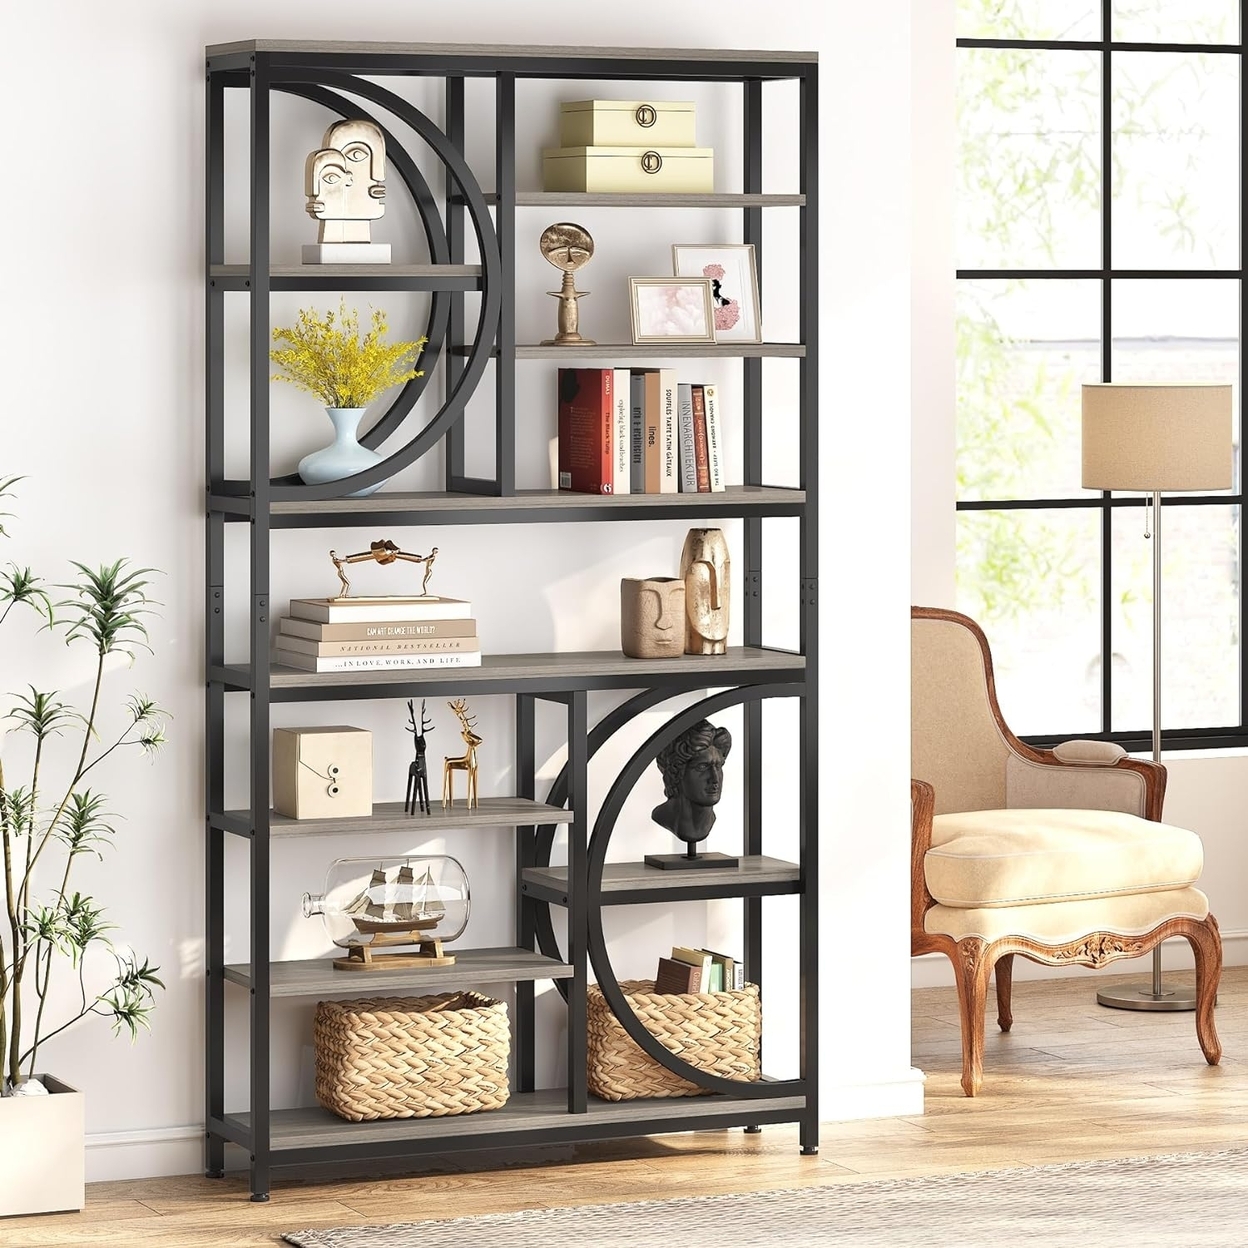 Tribesigns Industrial 8-Tier Etagere Bookcases, 77 Tall Book Shelf Open Display Shelves, Wood Look Accent Shelving Unit With Metal Frame -